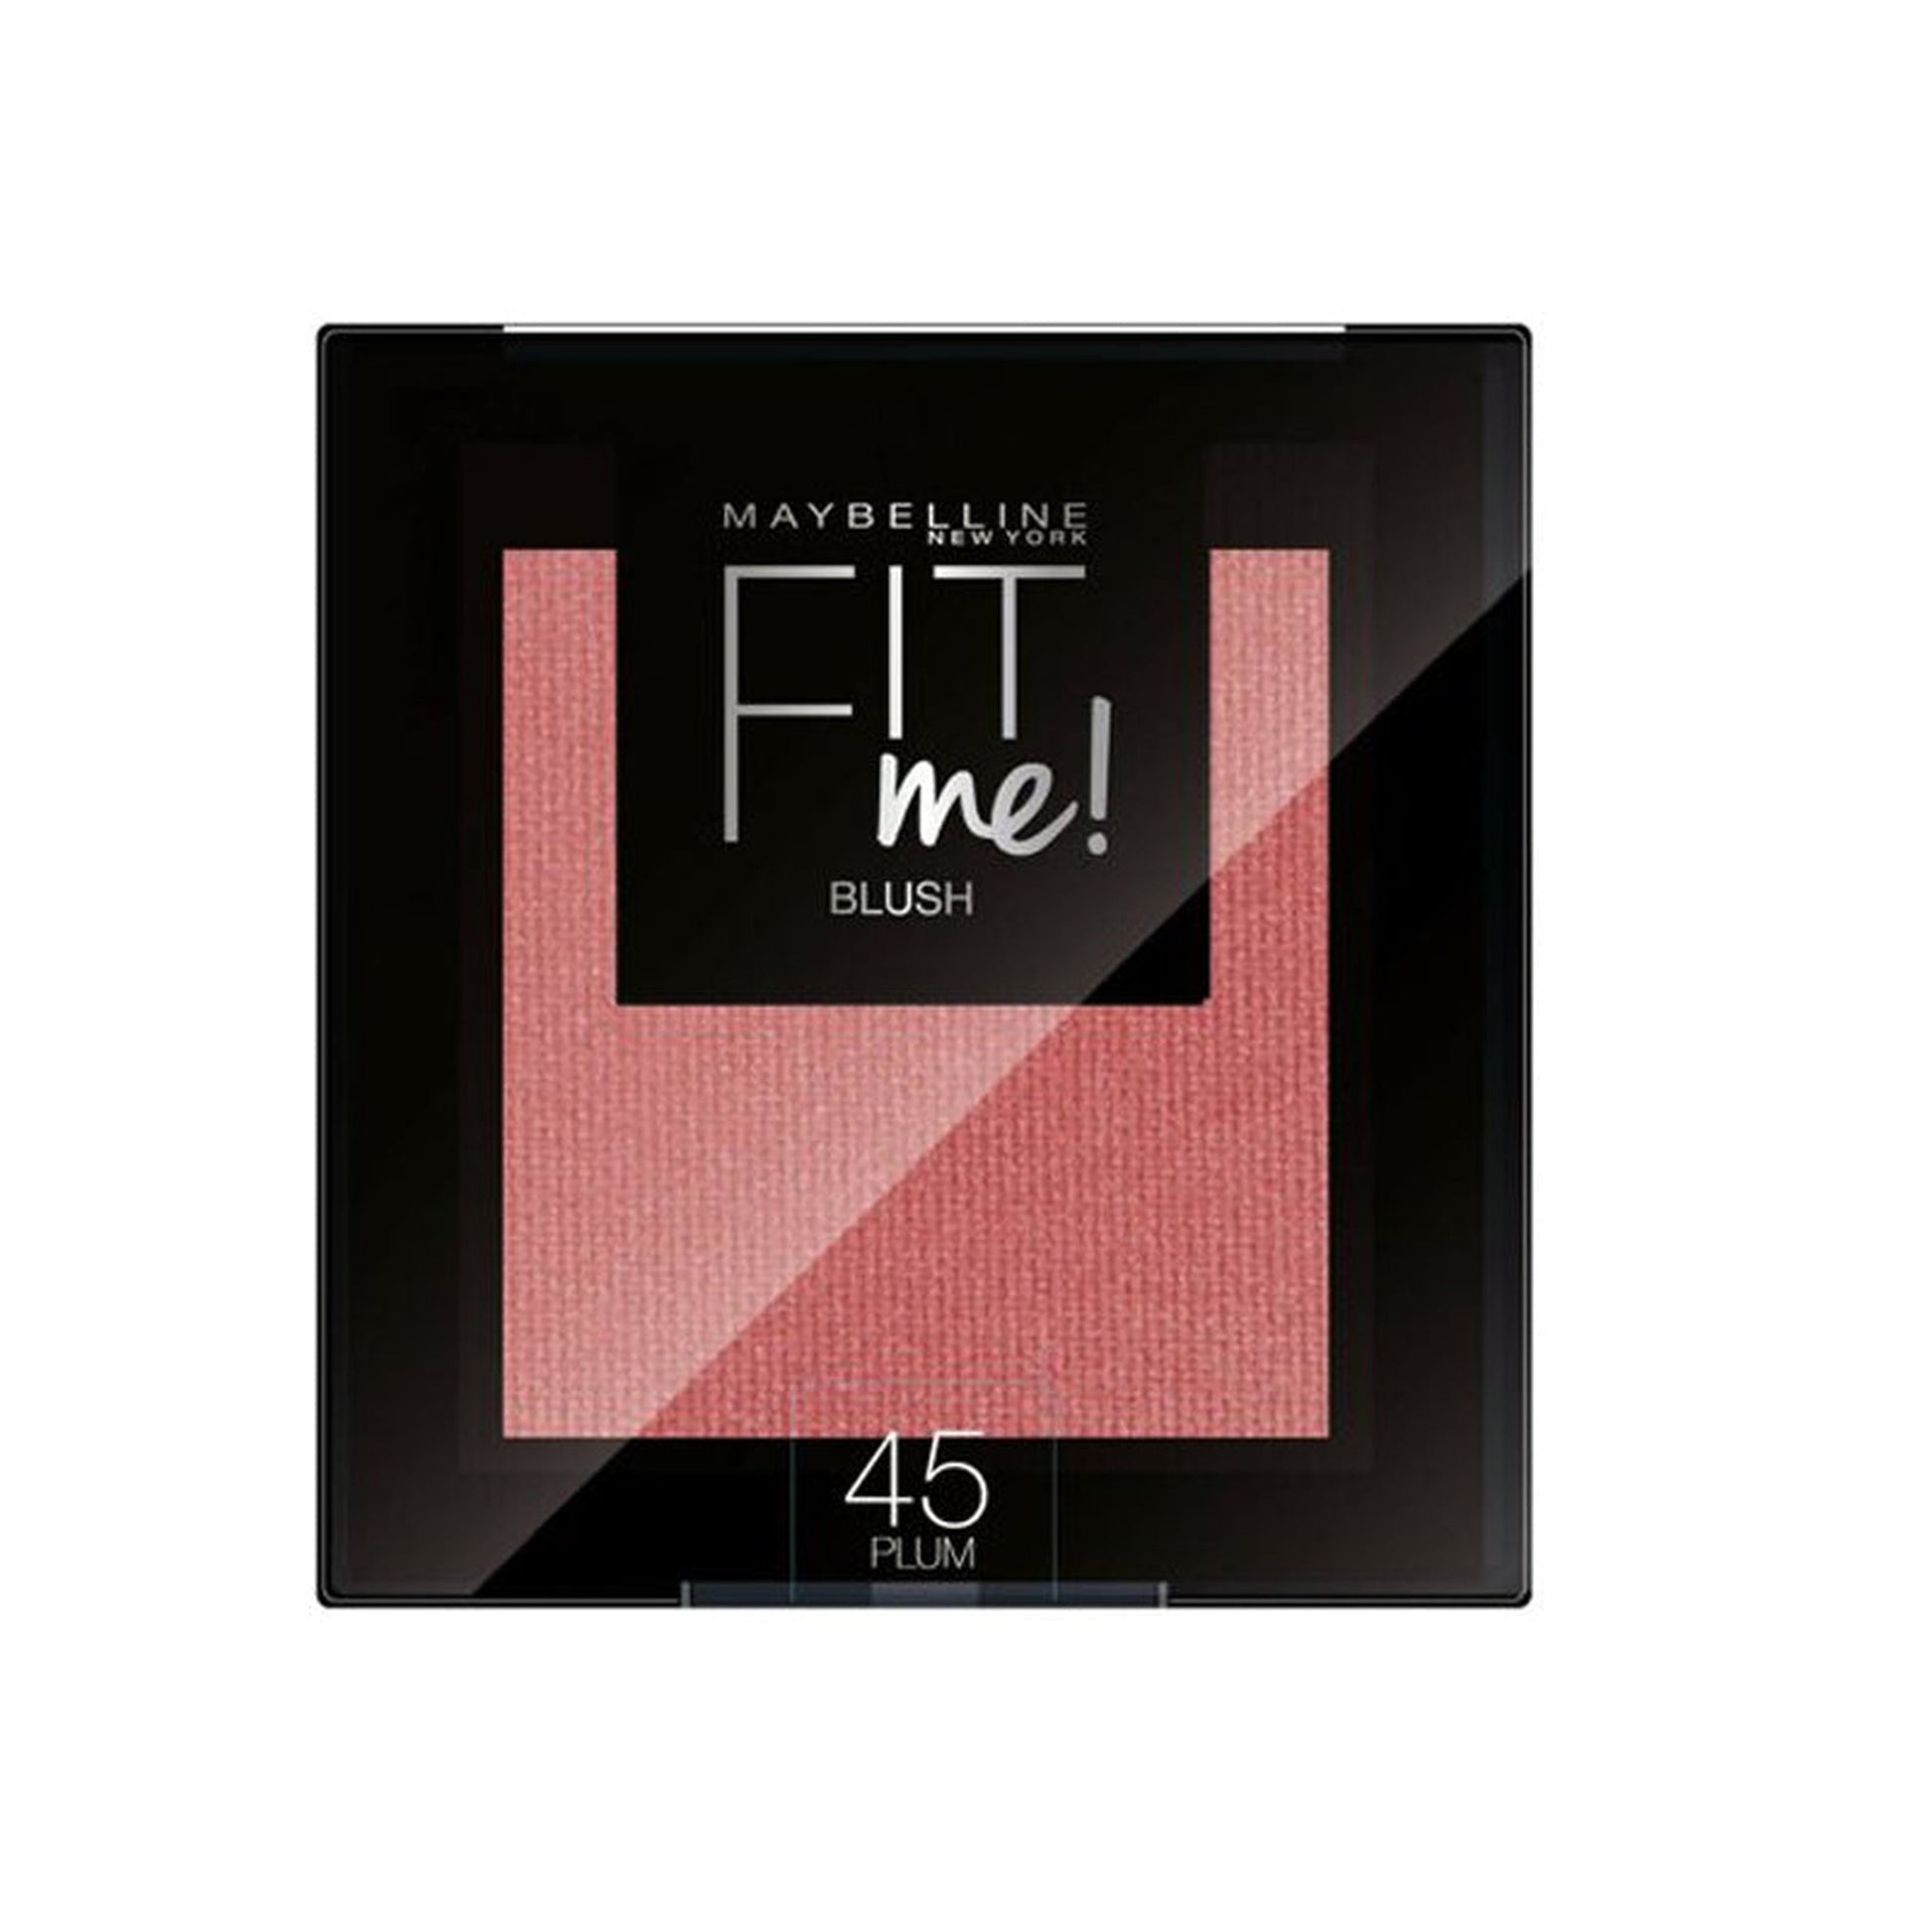 Maybelline Fit Me Blusher 45 Plum-Maybelline-BeautyNmakeup.co.uk